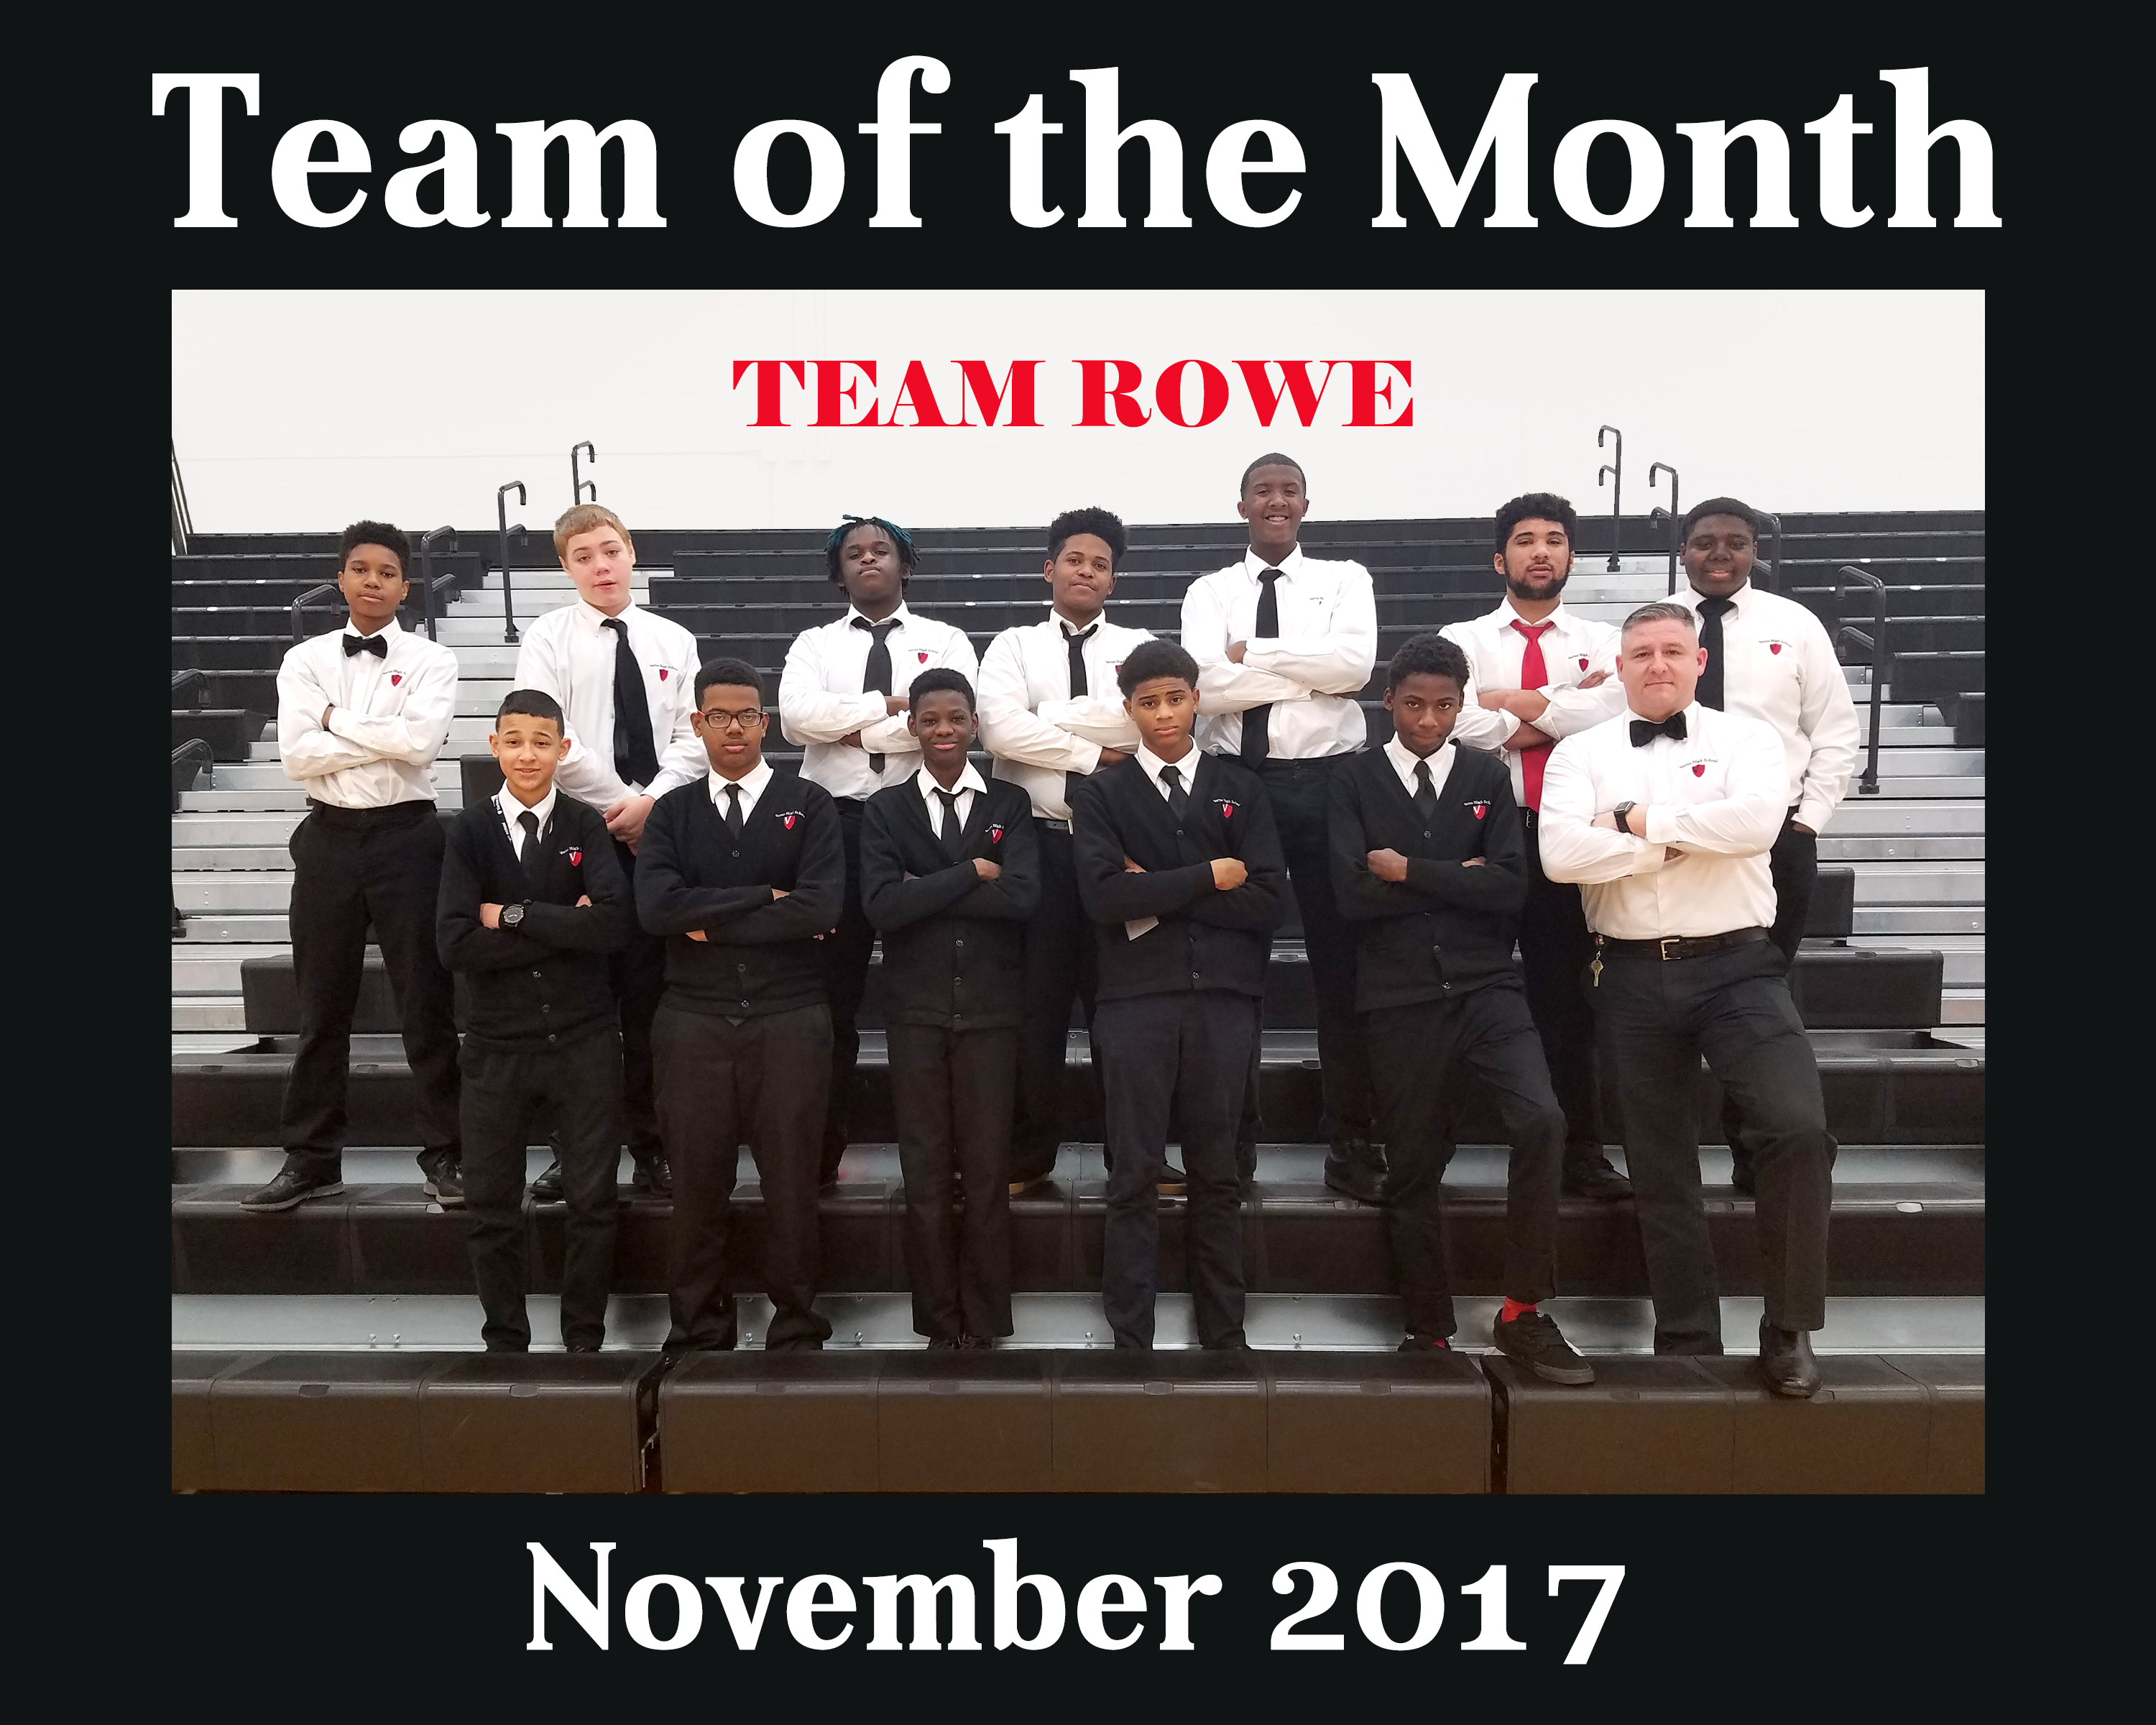 Team of the Month - November 2017